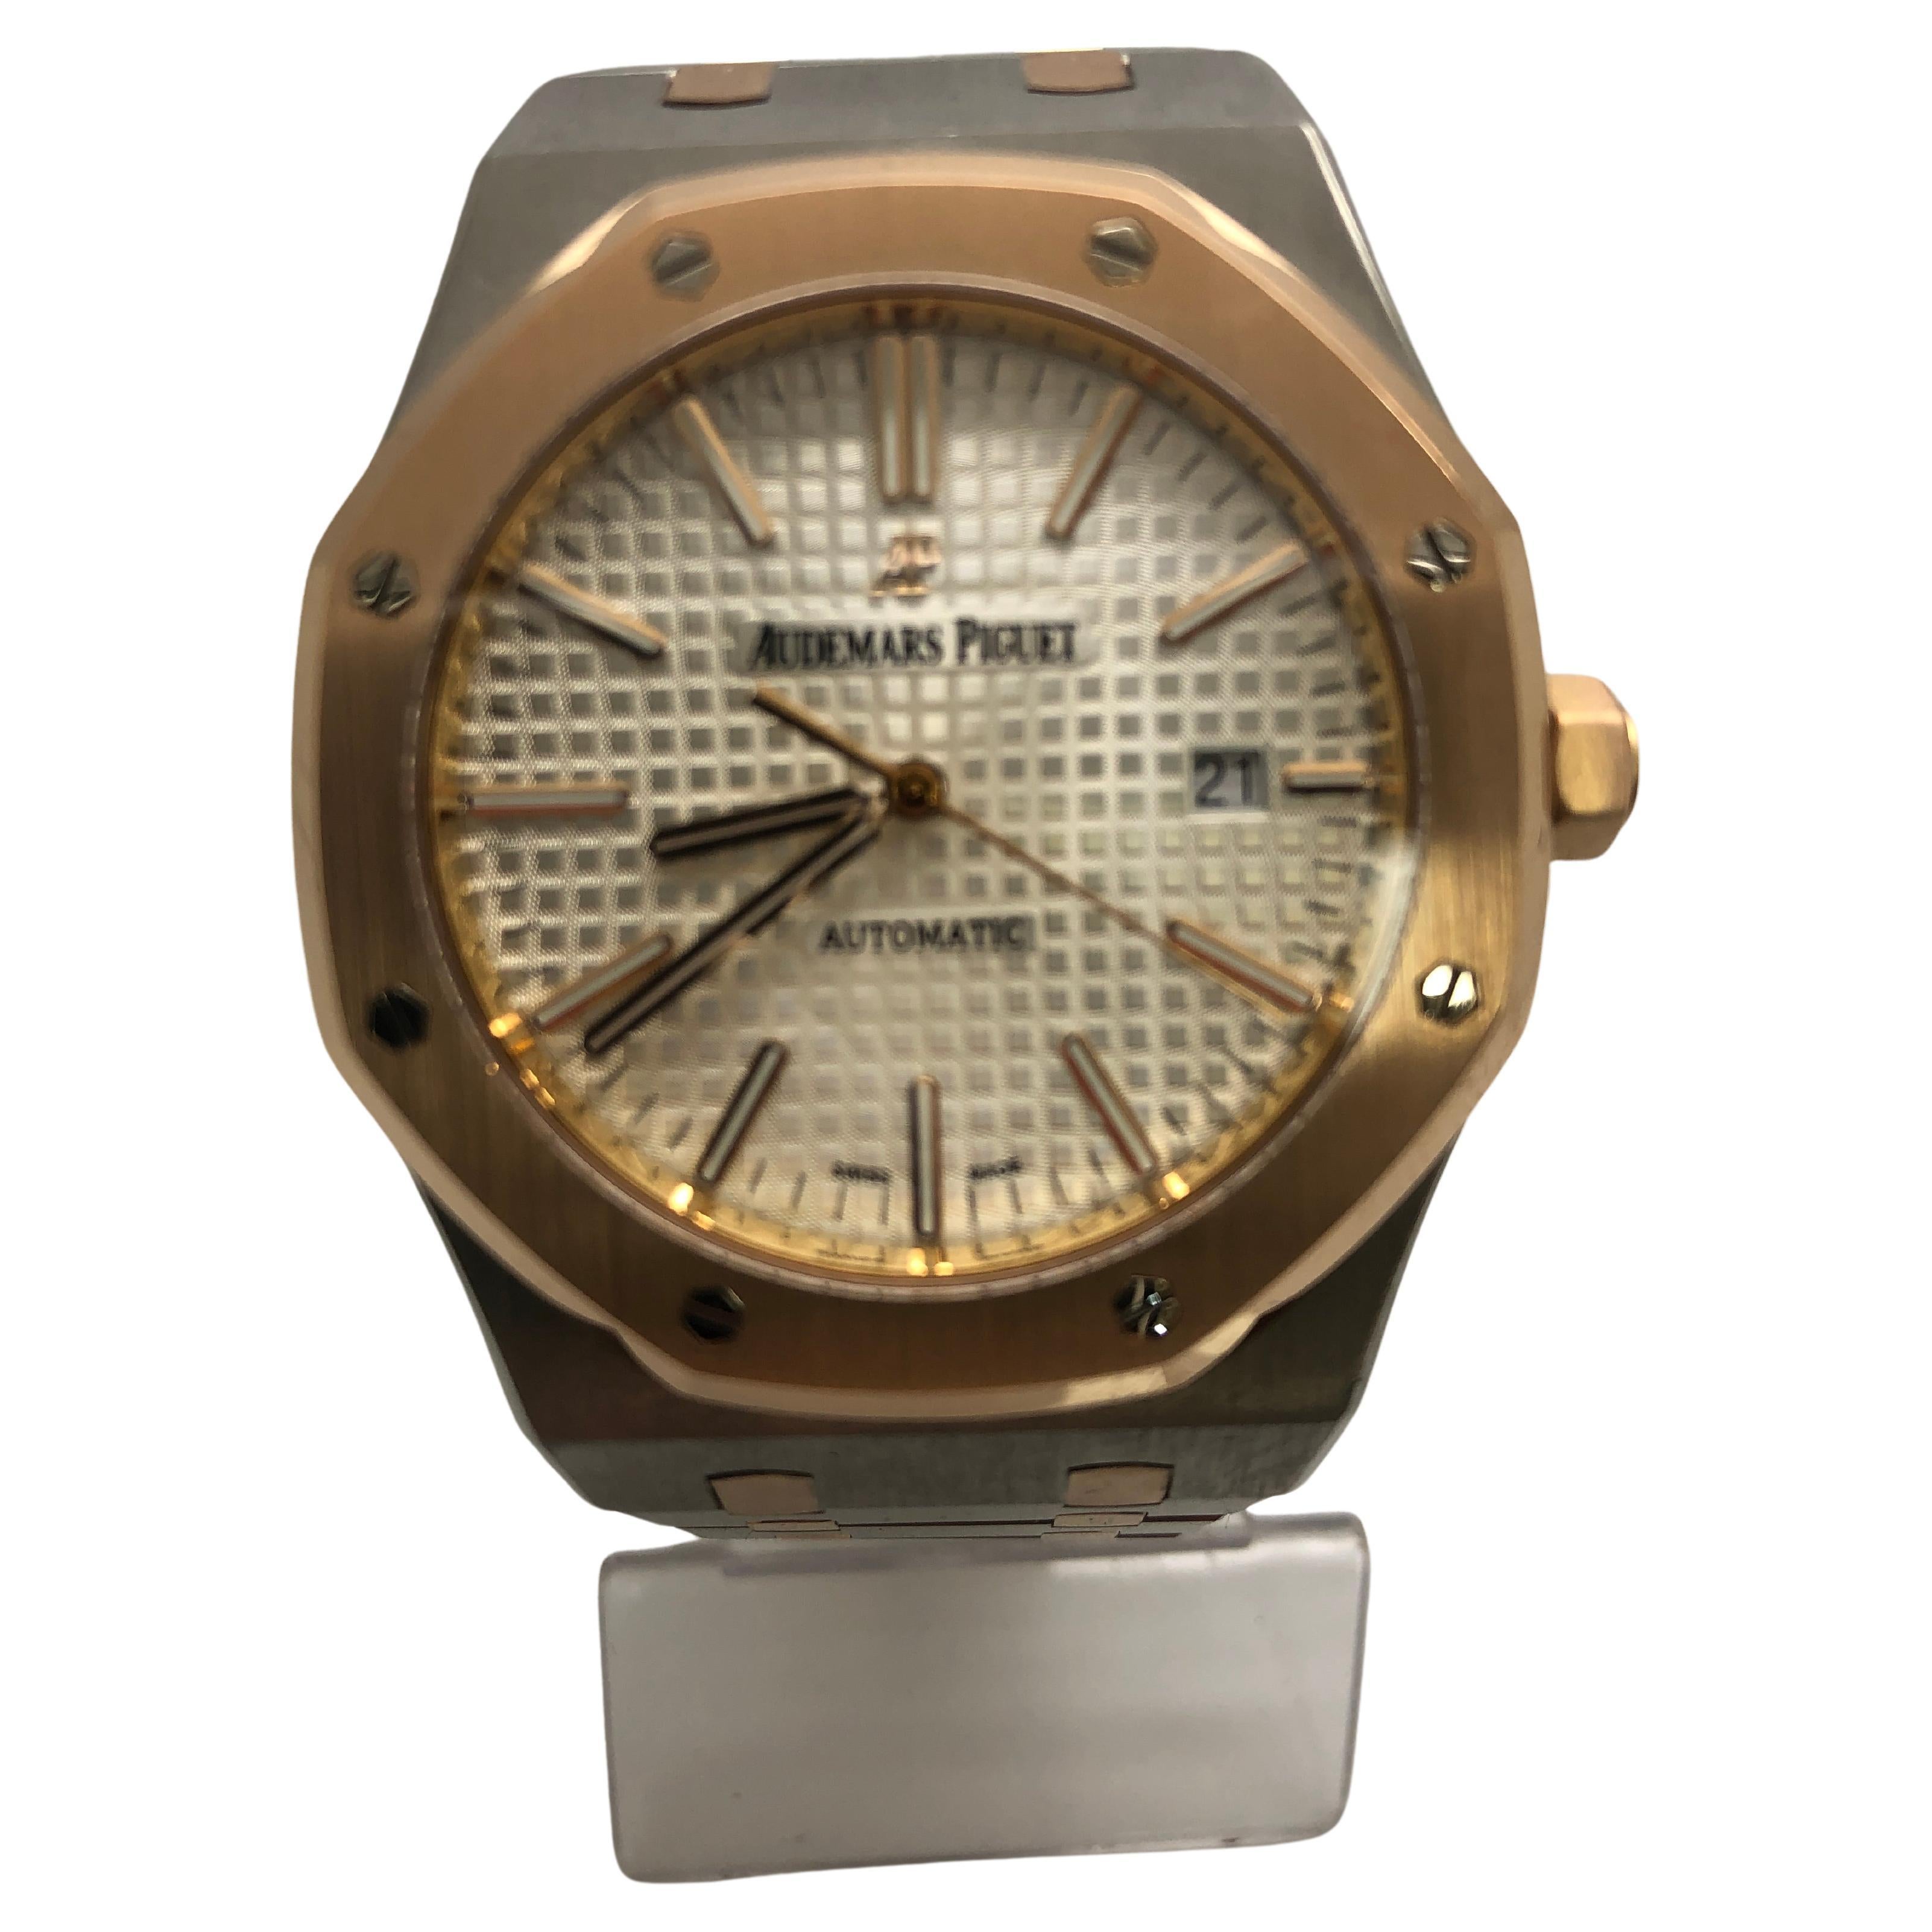 Audemars Piguet Royal Oak Two Tone Rose Gold Mens Watch 15400

Hardly worn Mint Condition

Comes with Audemars Piguet Booklet

Free overnight shipping

shop with confidence

bank wire only

